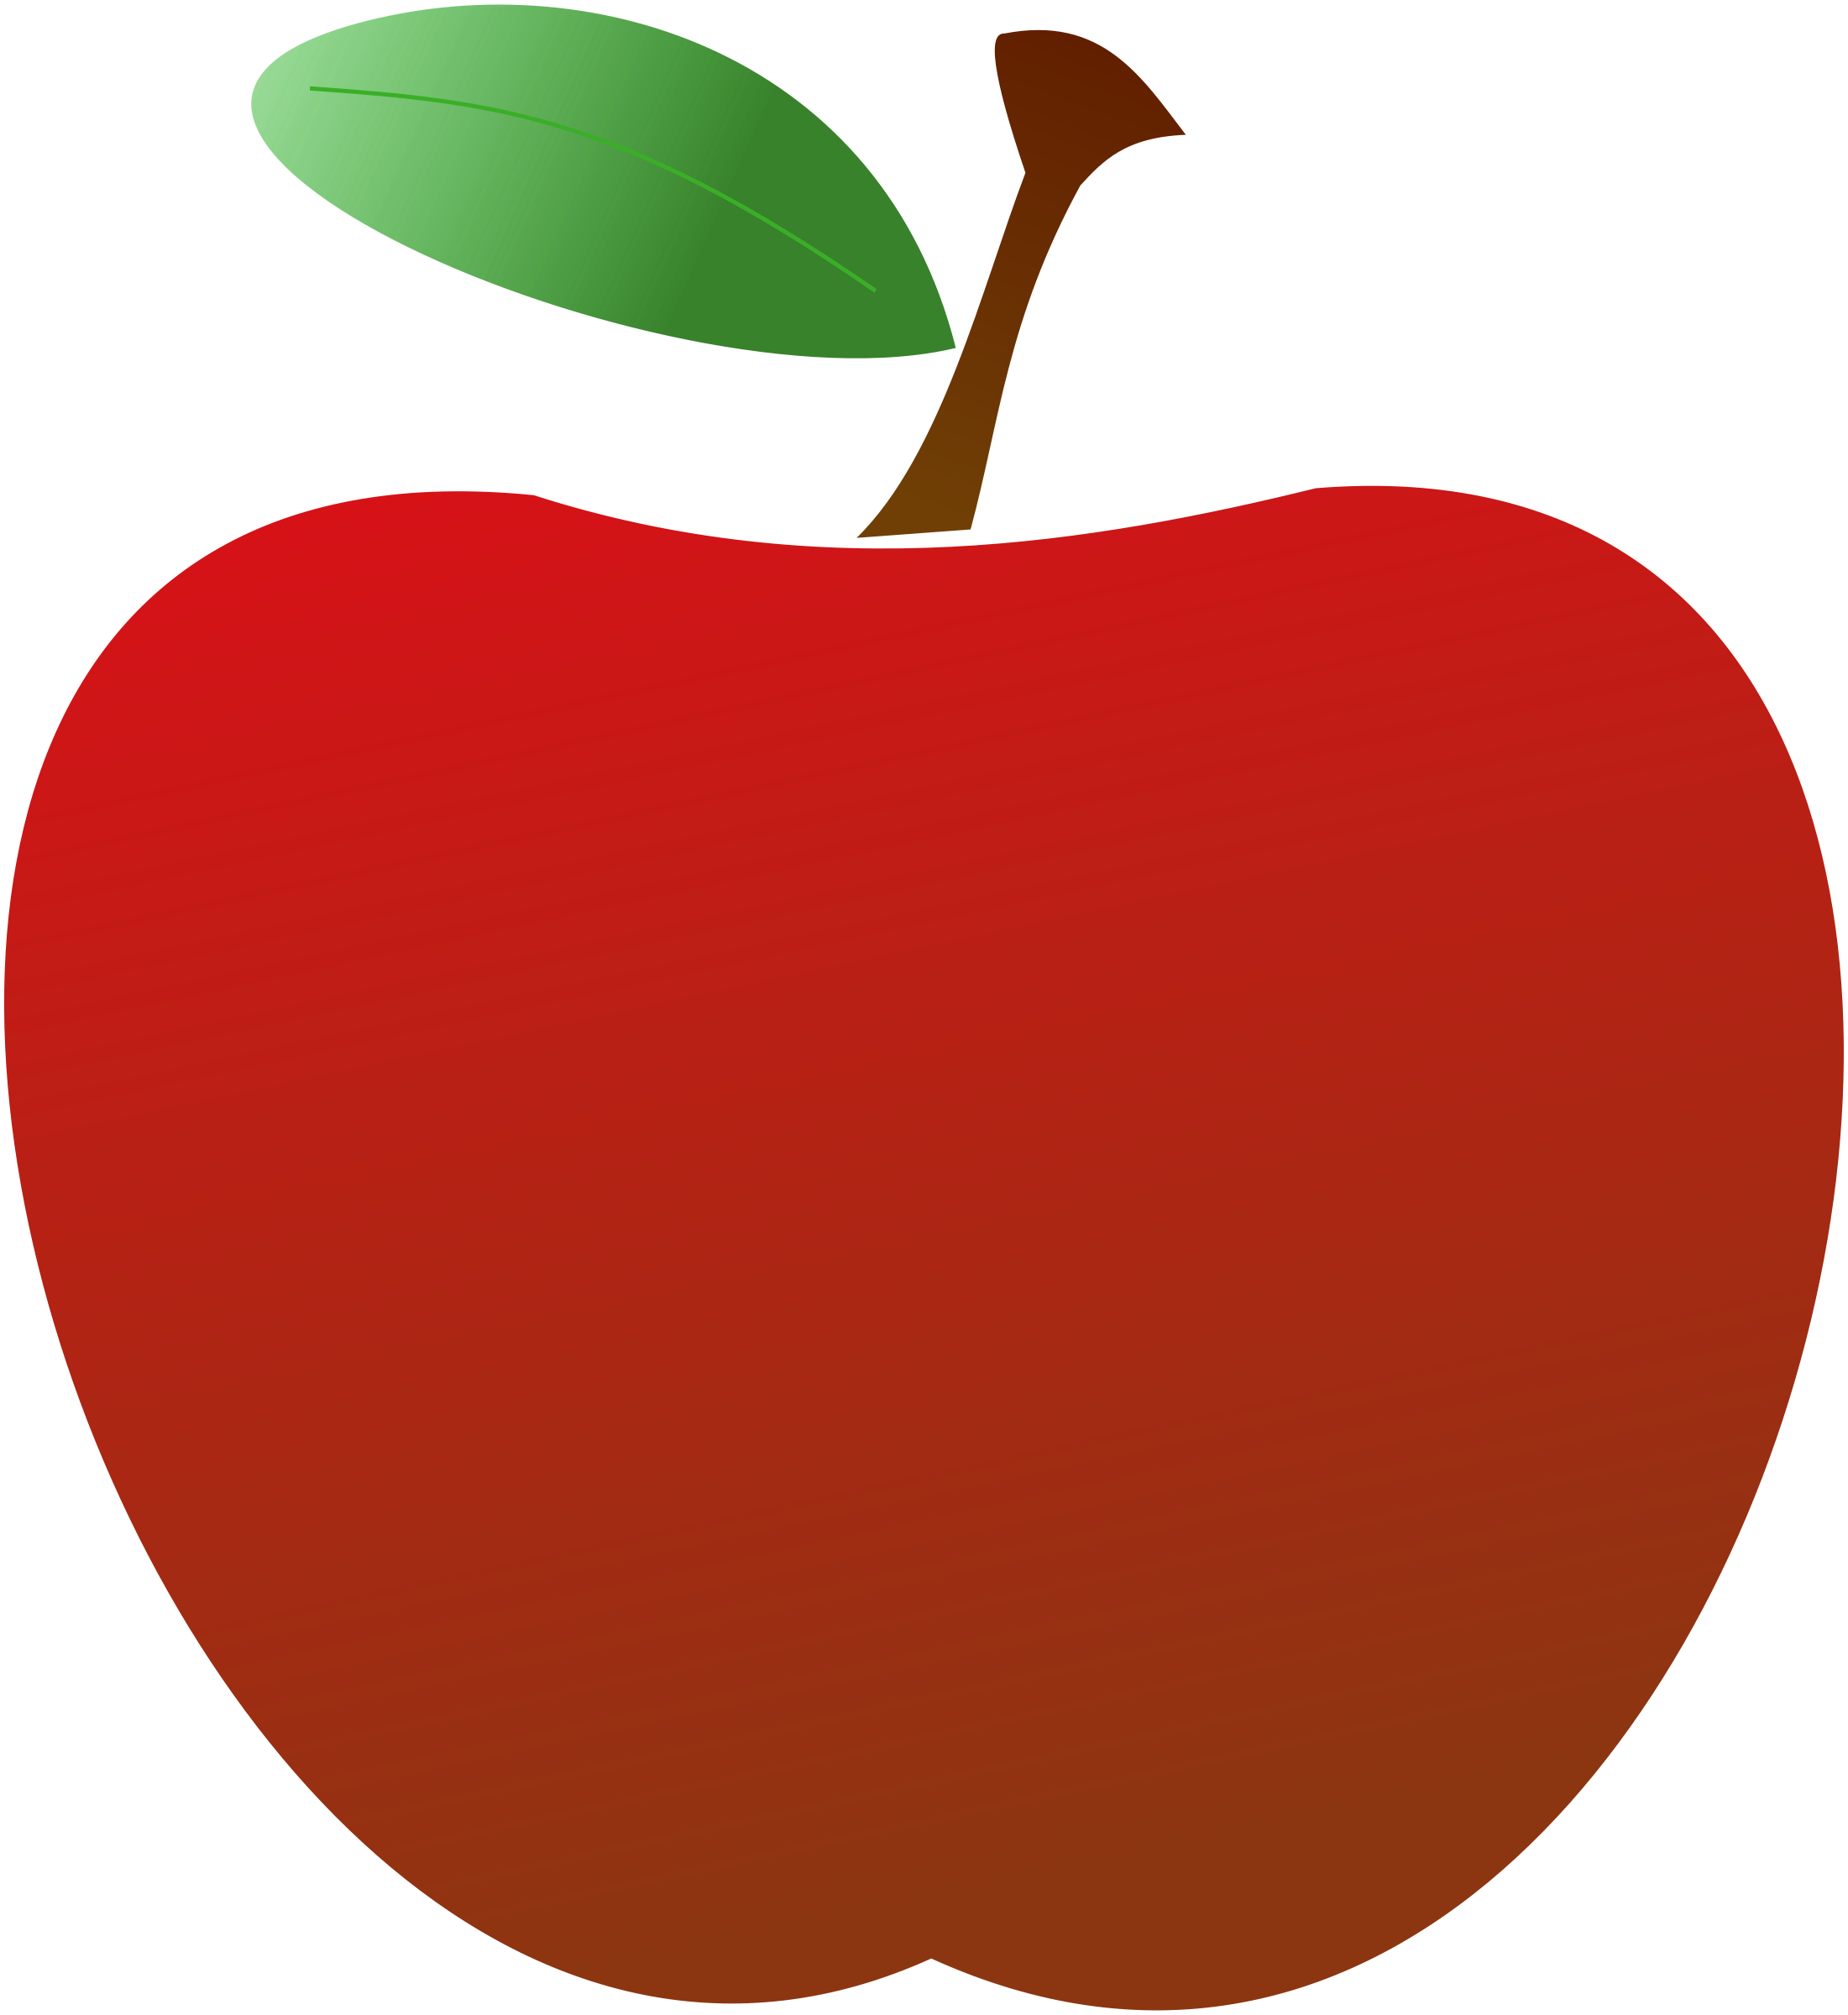 Apple Clipart With No Background.